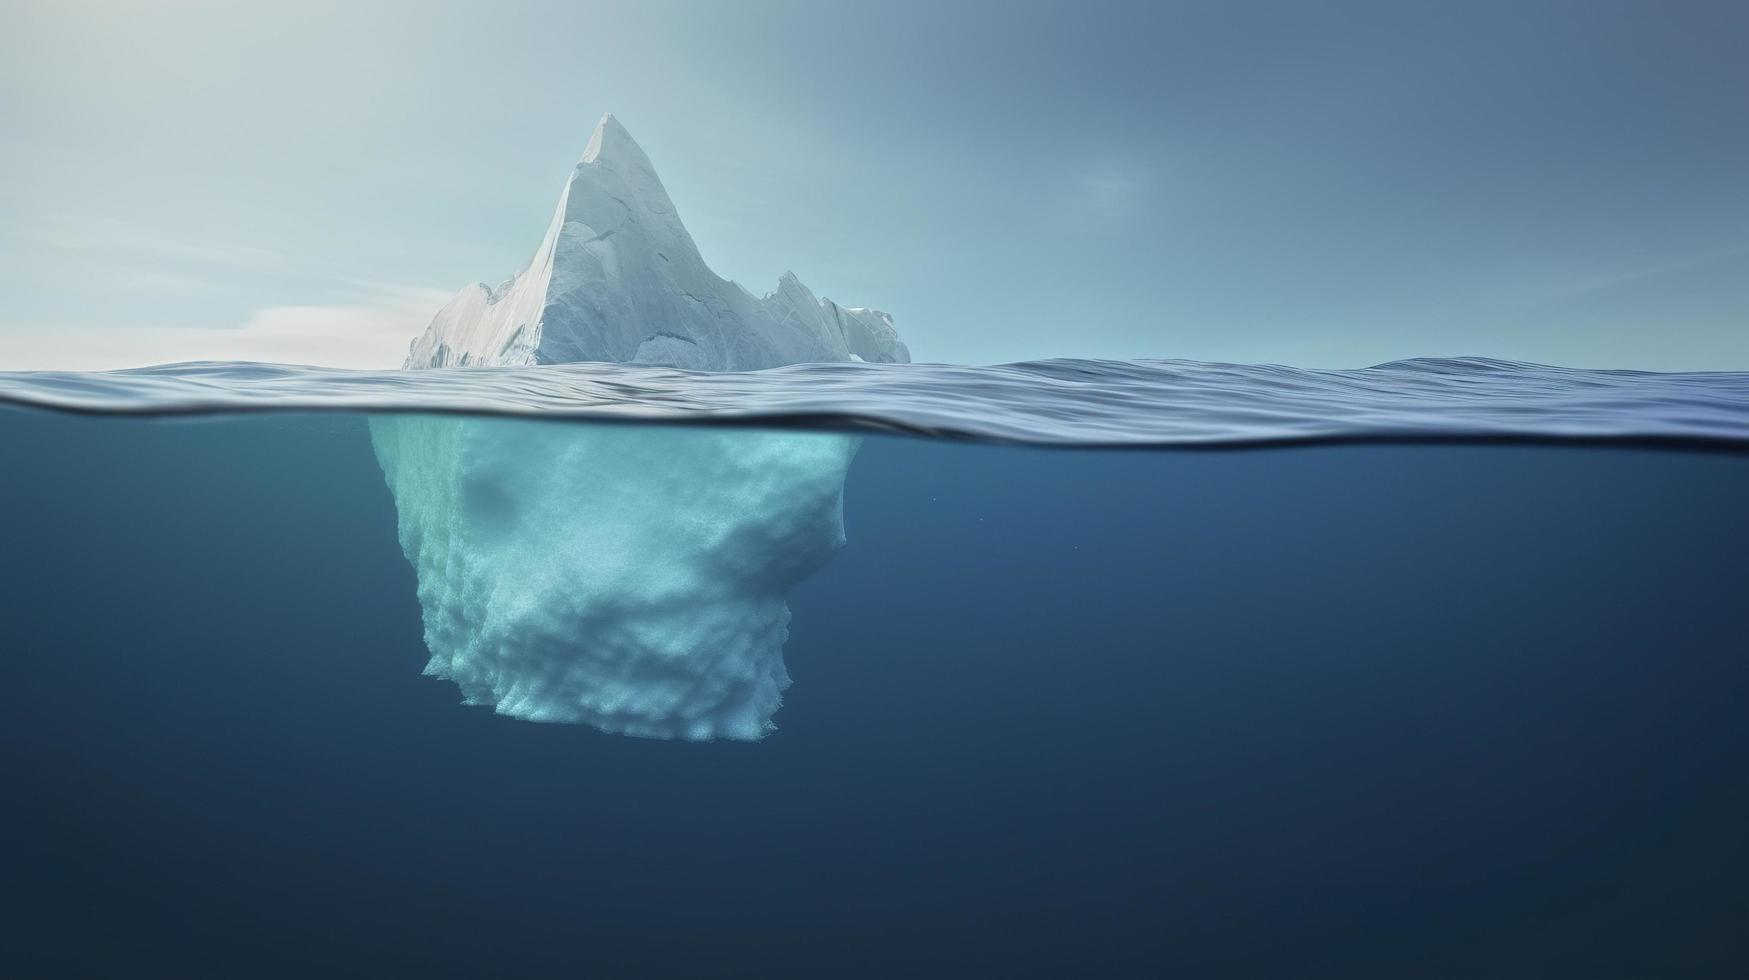 Iceberg with above and underwater view taken in greenland. iceberg - hidden danger and global warming concept. iceberg illusion creative idea, generat ai photo